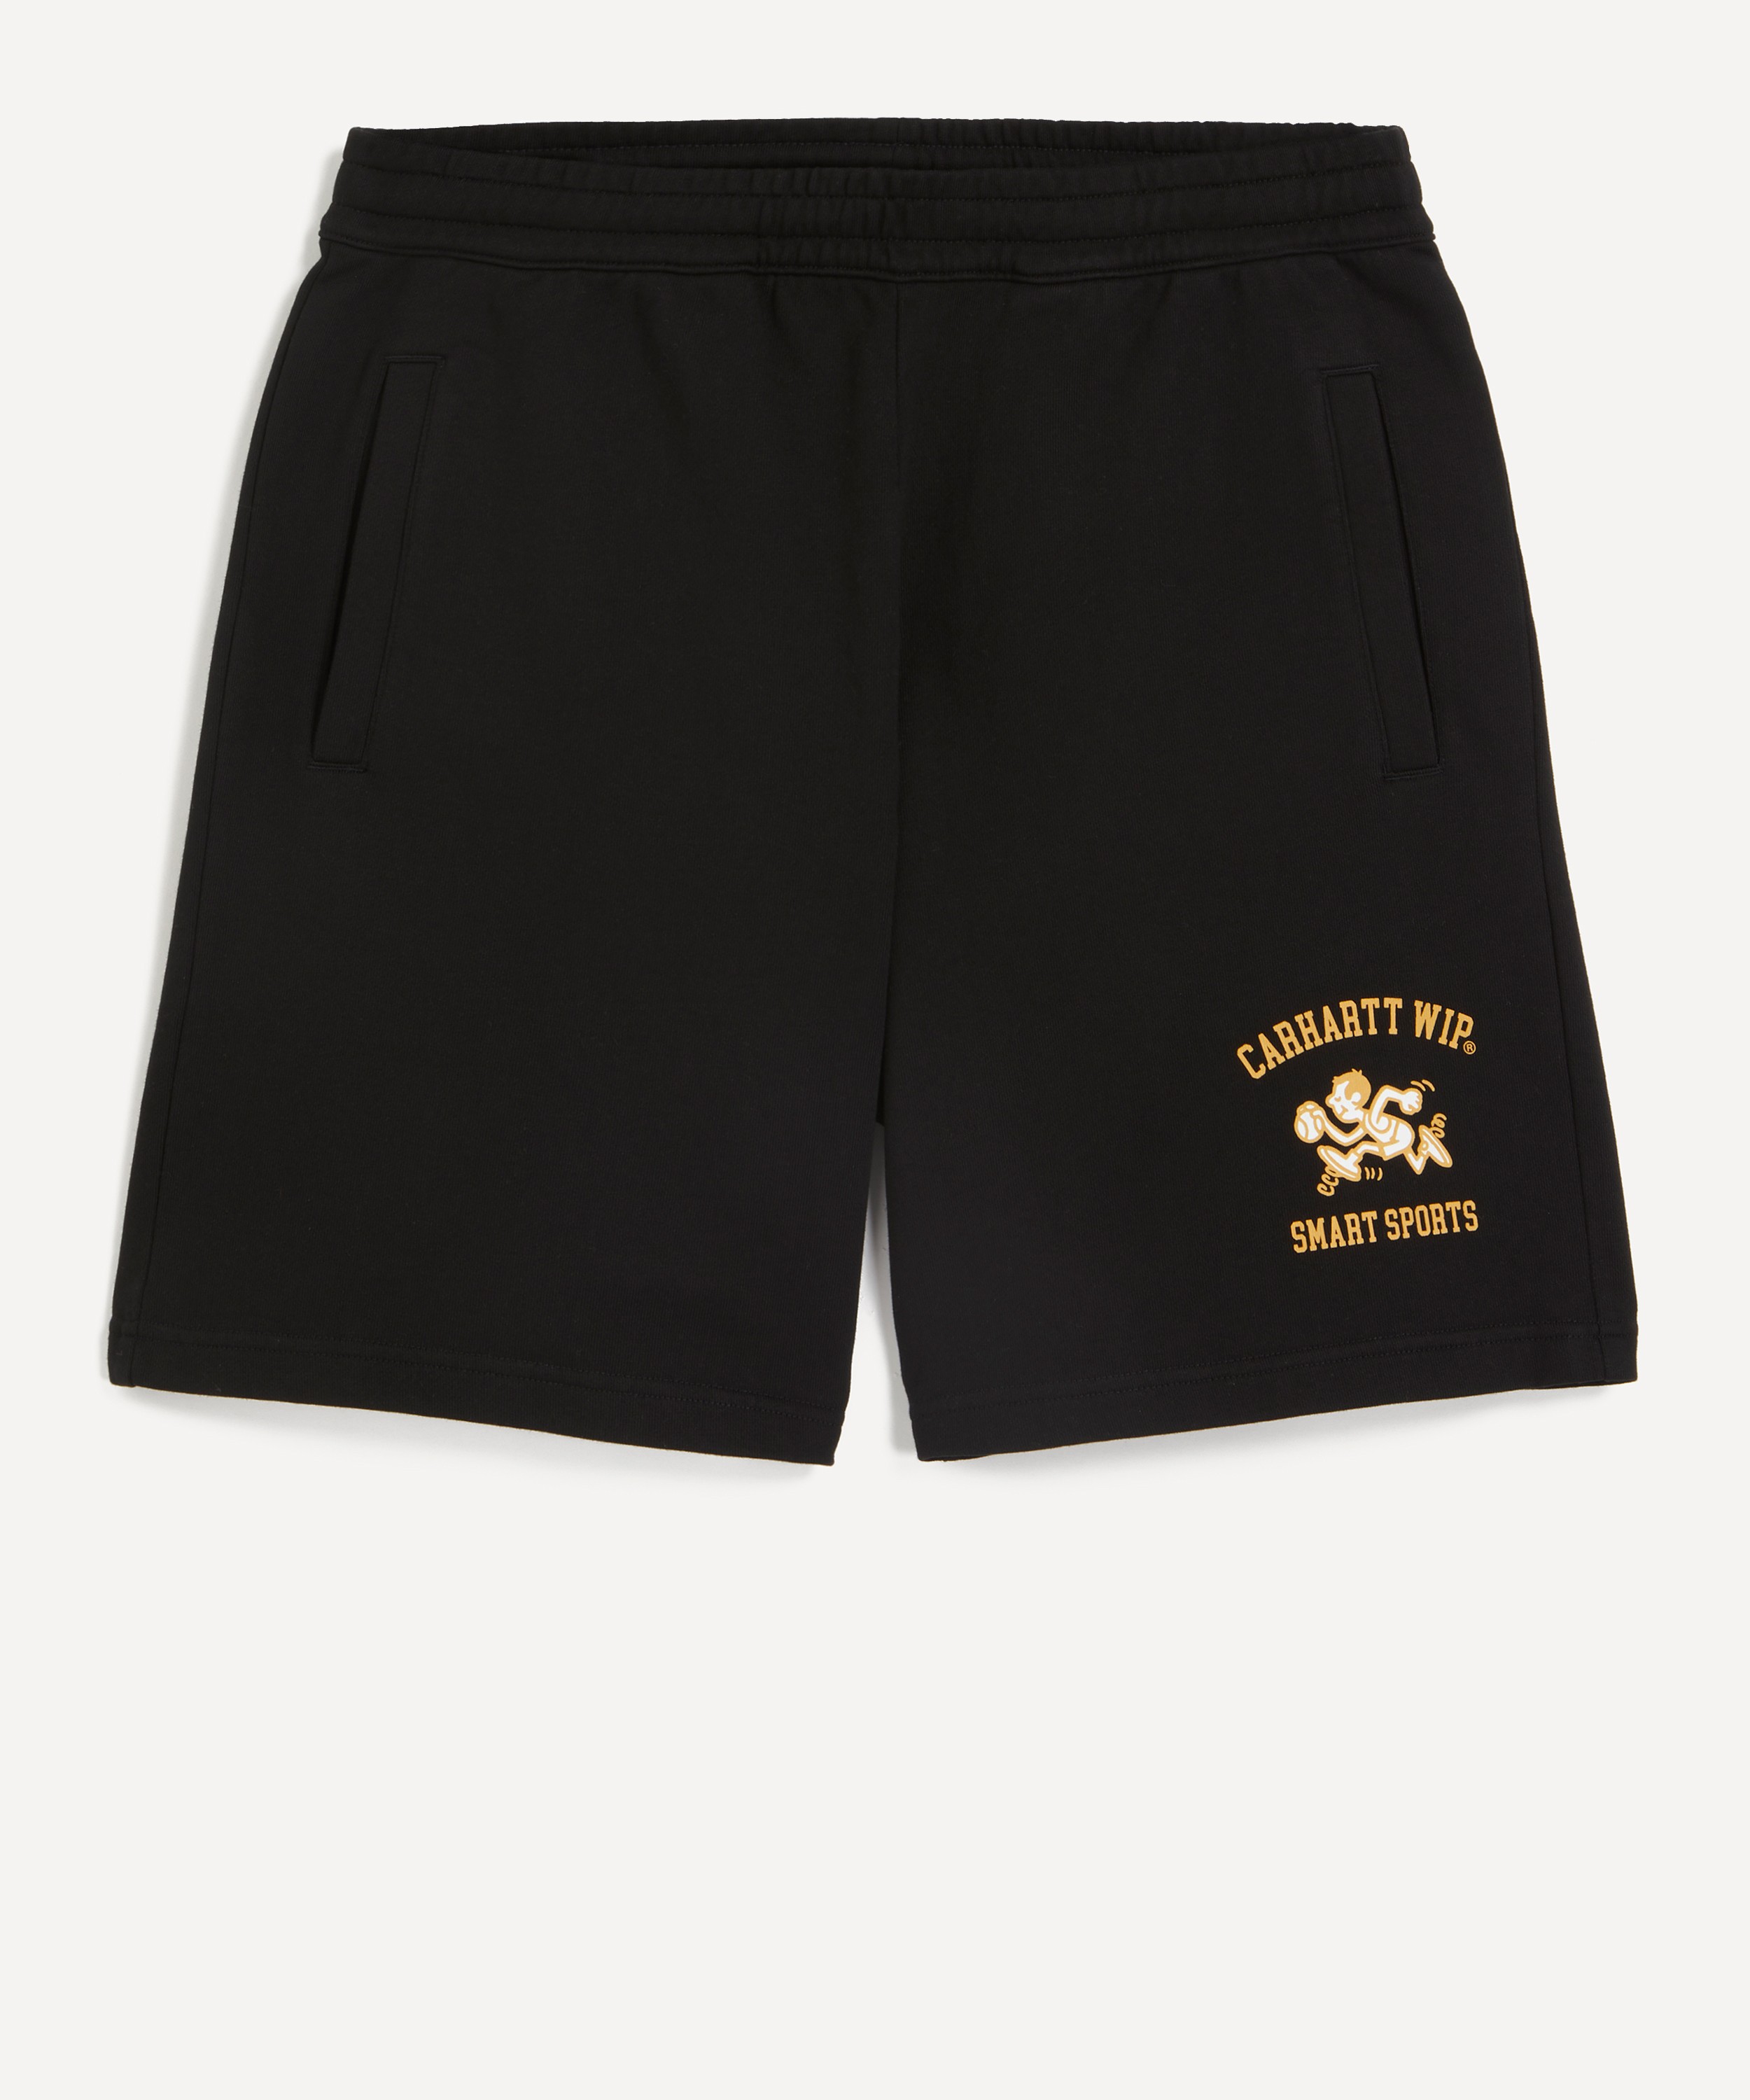 Carhartt WIP - Smart Sports Sweat Shorts image number 0